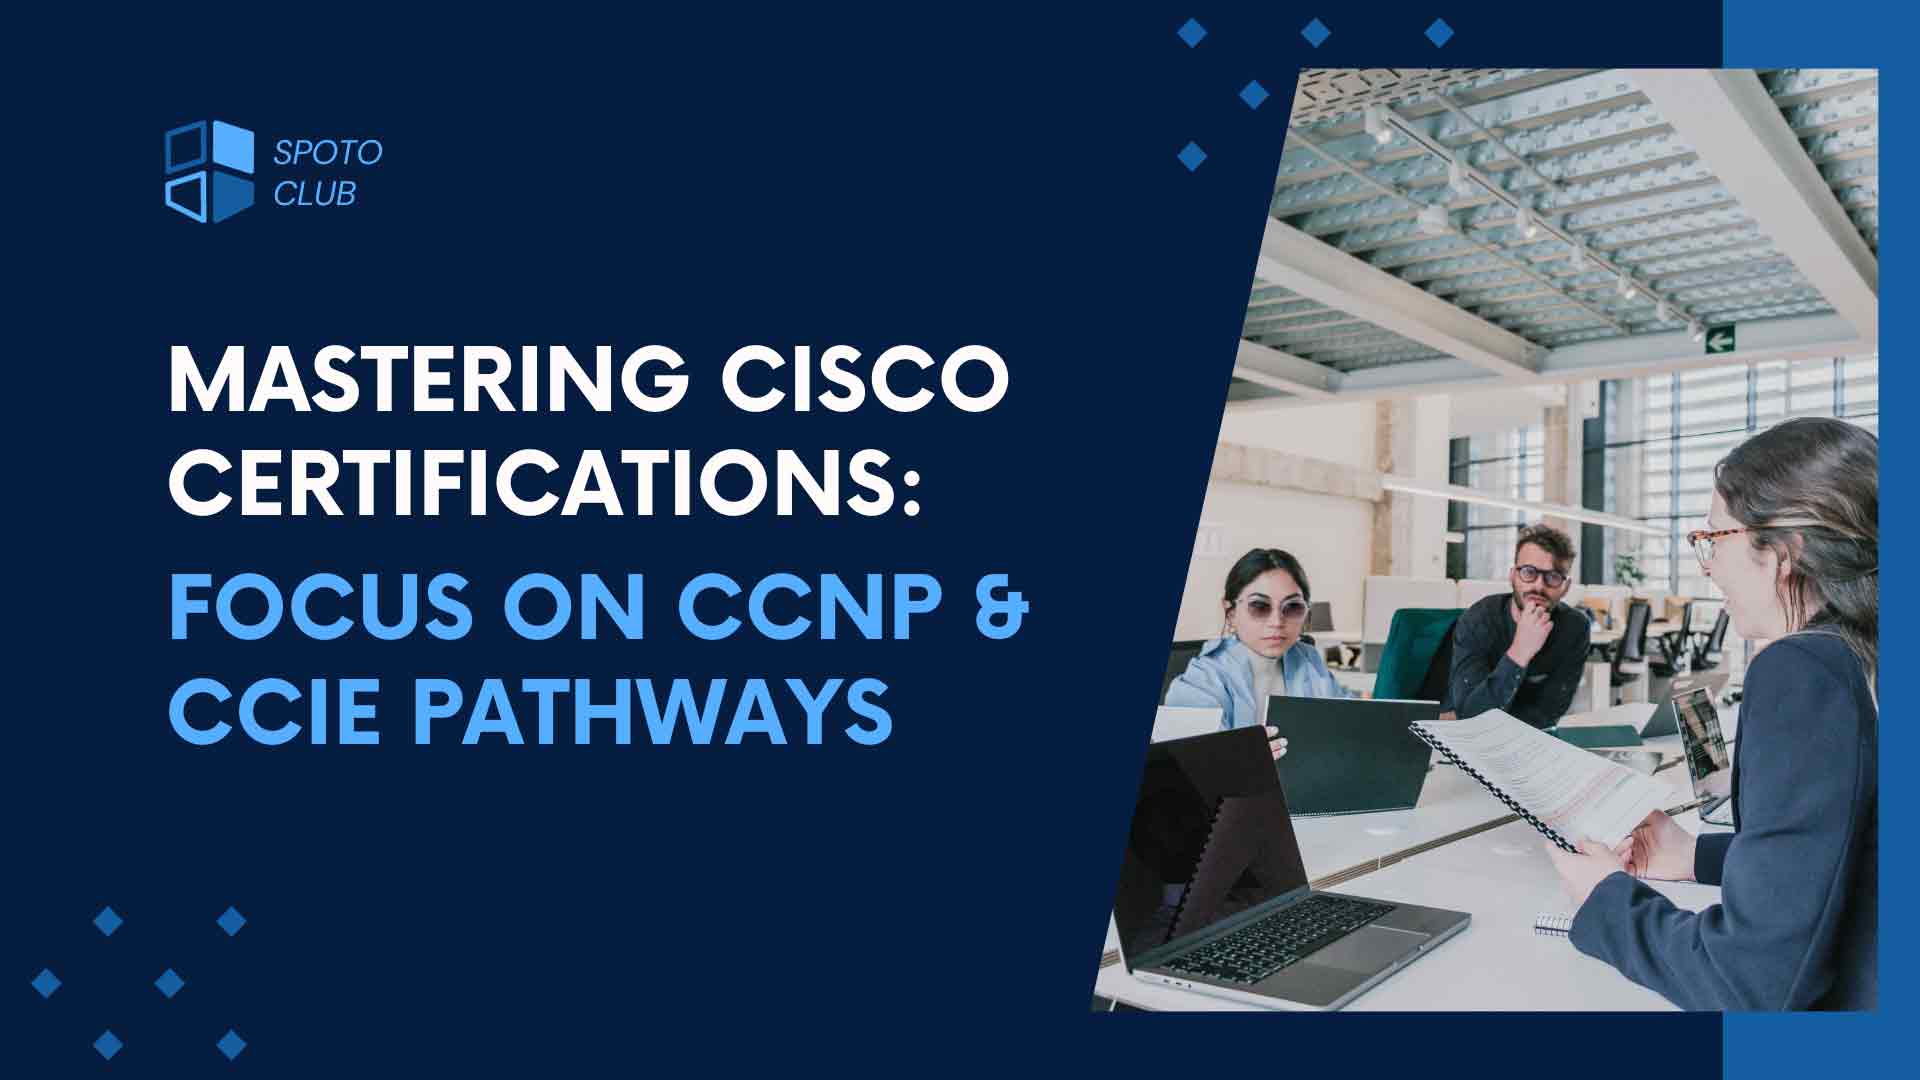 Mastering Cisco Certifications: A Focus on CCNP & CCIE Pathways